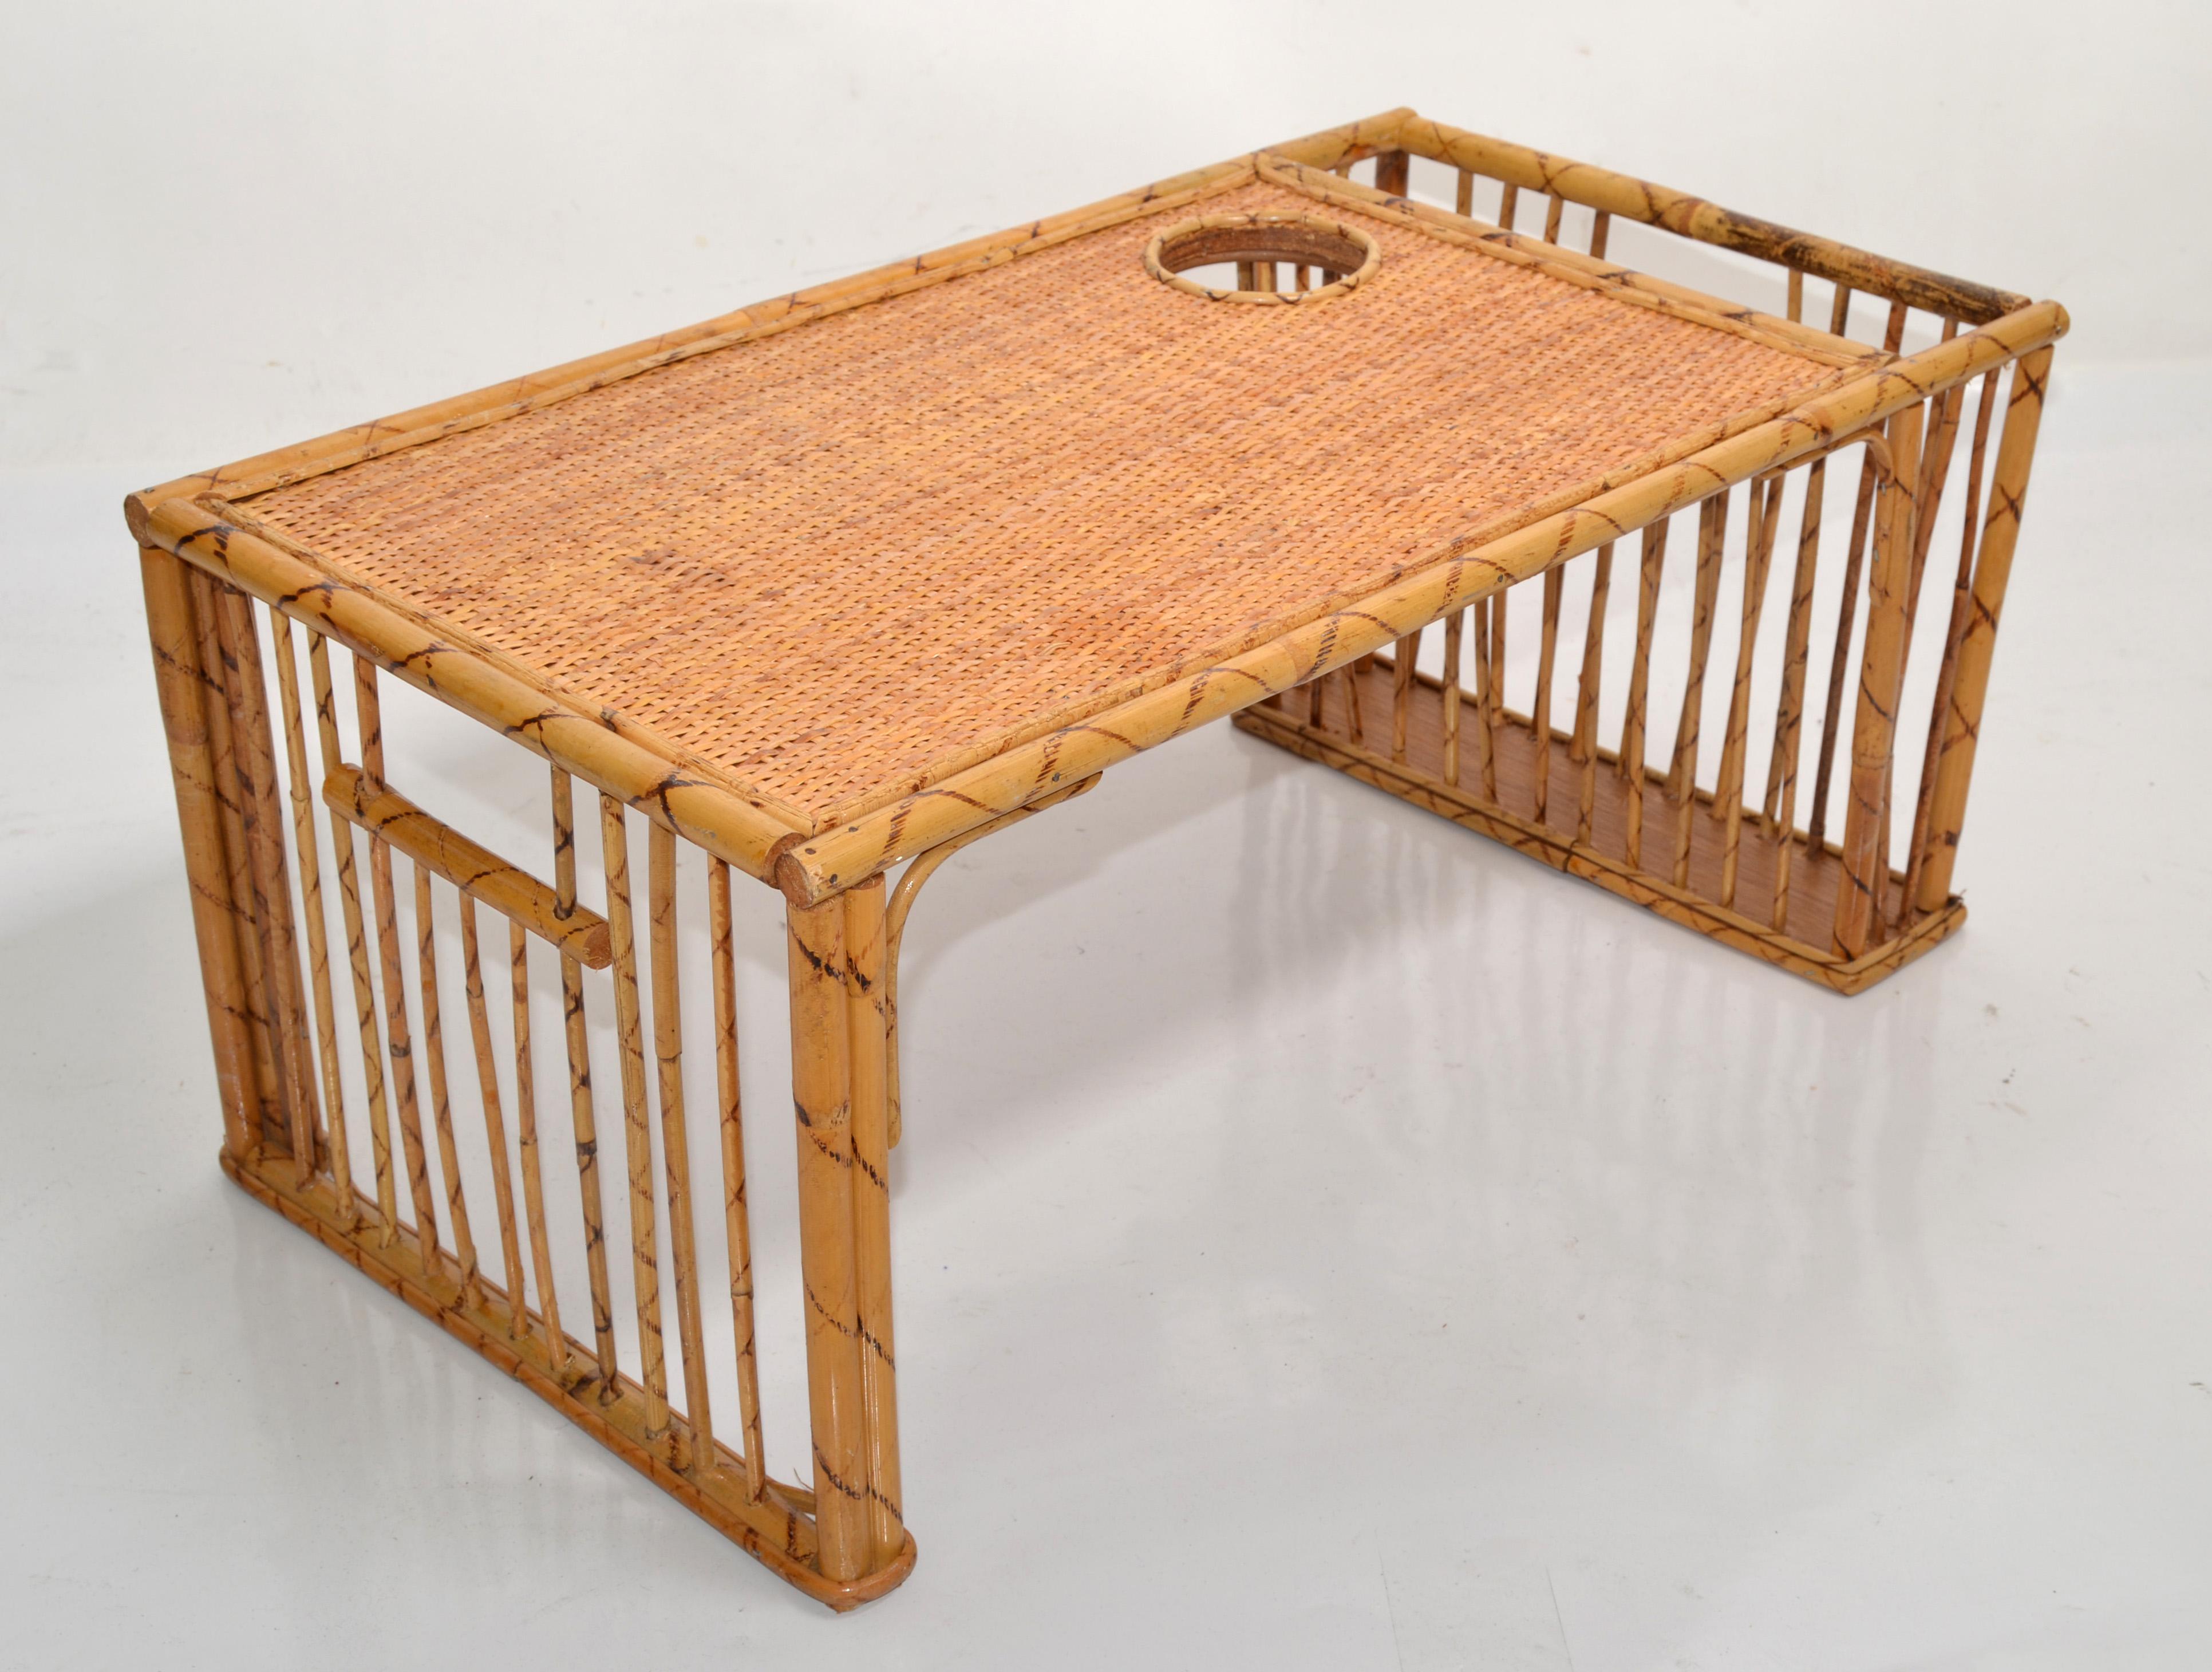 Add some Boho Chic vintage charm to your breakfast in bed with this amazing Tiger bamboo, caning and rattan bed tray table. 
Handwoven and hand-crafted in a medium yellow wood tone finish, this rectangular tray comes with a cup holder and magazine